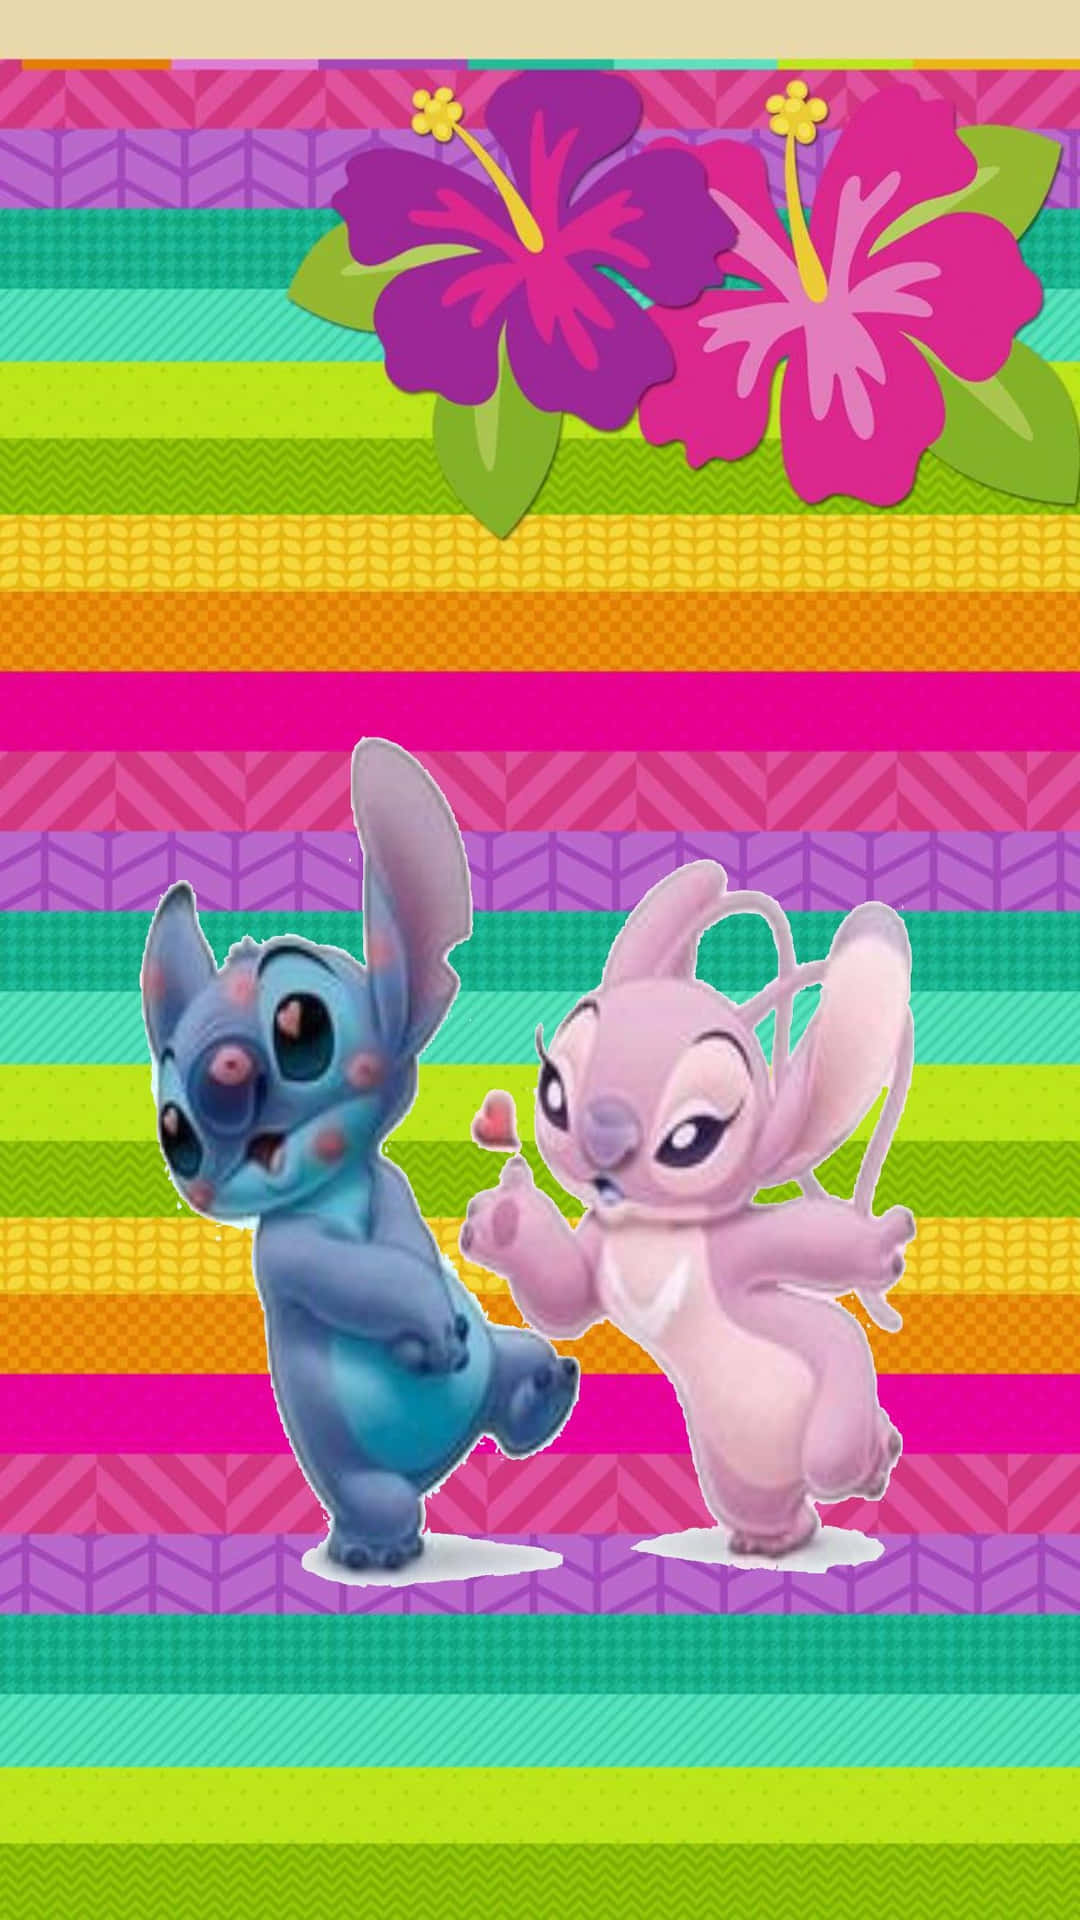 Caption: Love Stitch and Angel Adorable Couple Wallpaper